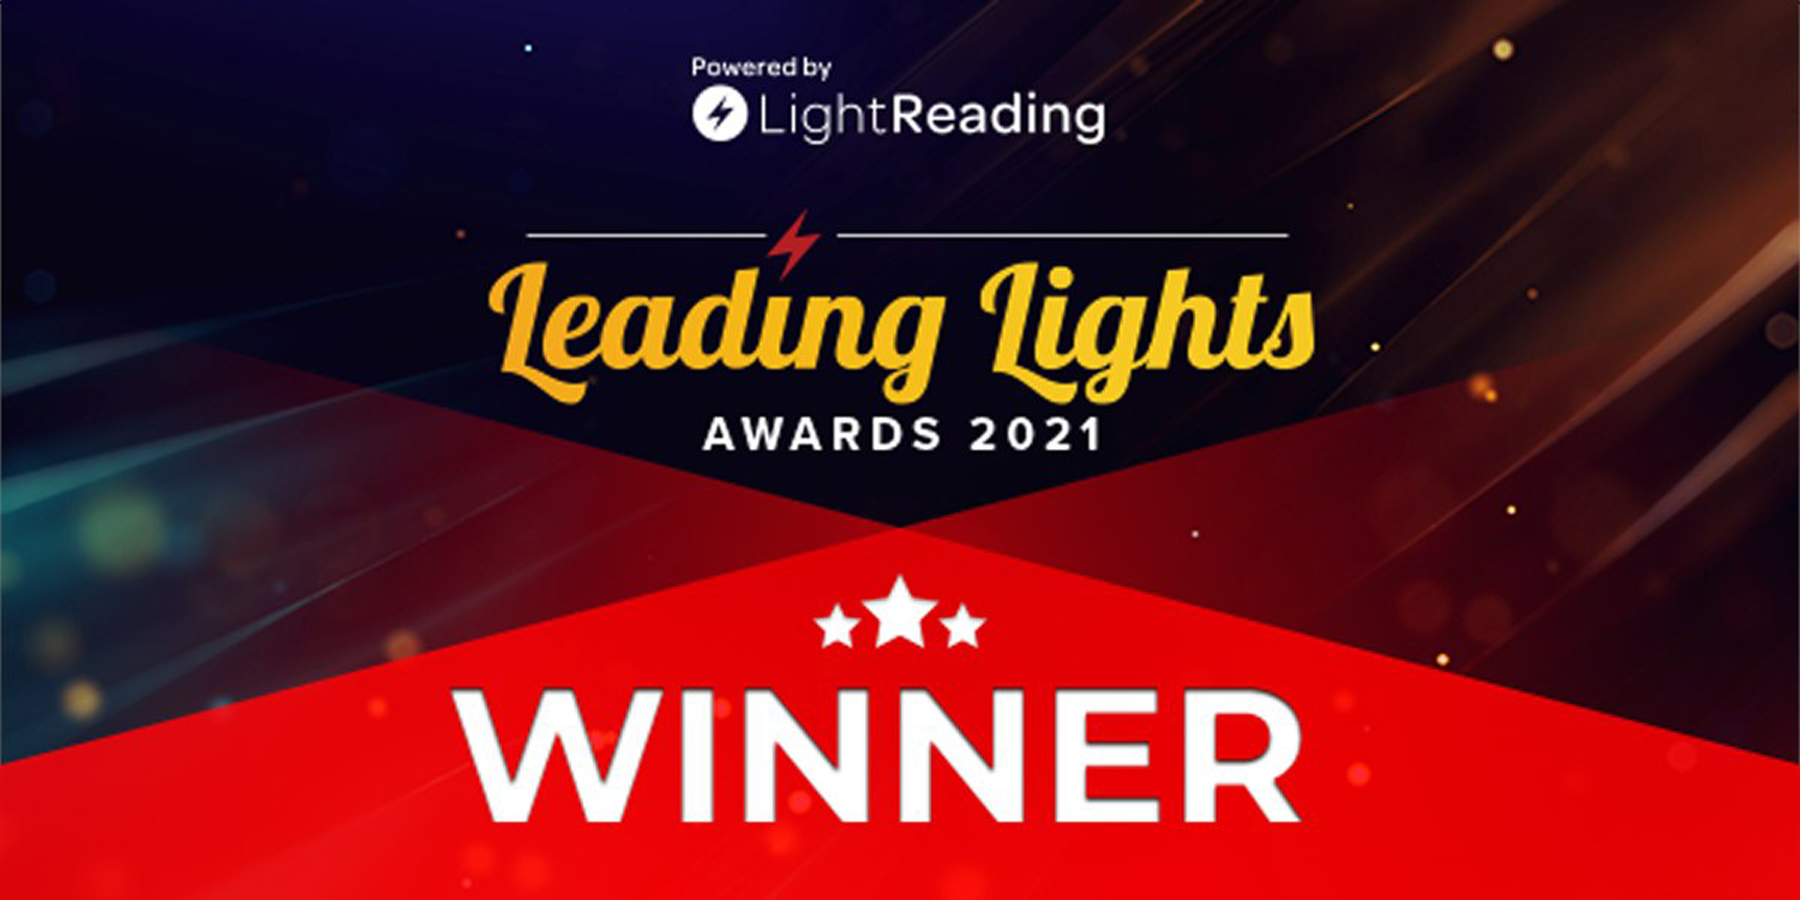 Juniper Networks Awarded Leading Lights Award for Most Innovative SD-WAN Product/Service Evolution